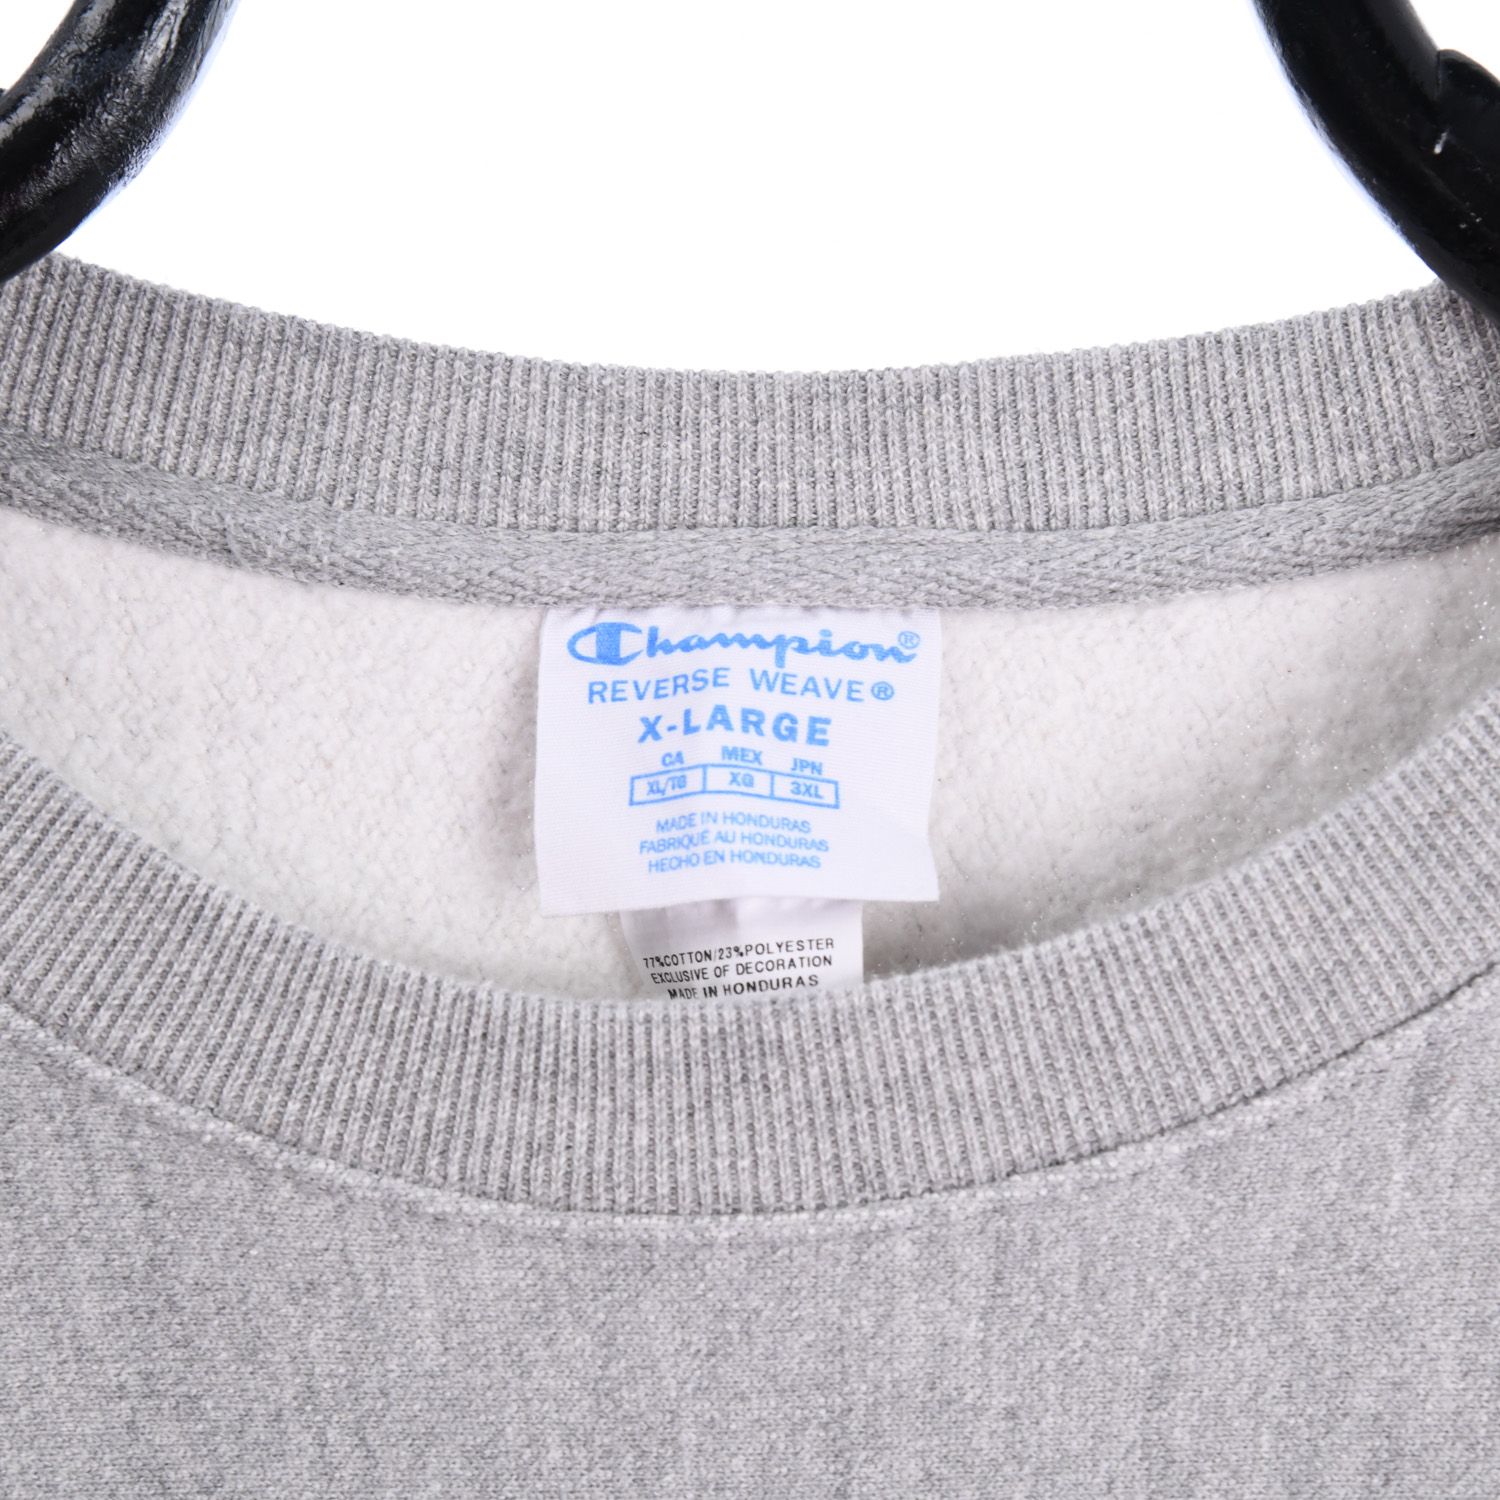 Champion Reverse Weave Grey Sweatshirt With Embroidered Spell Out